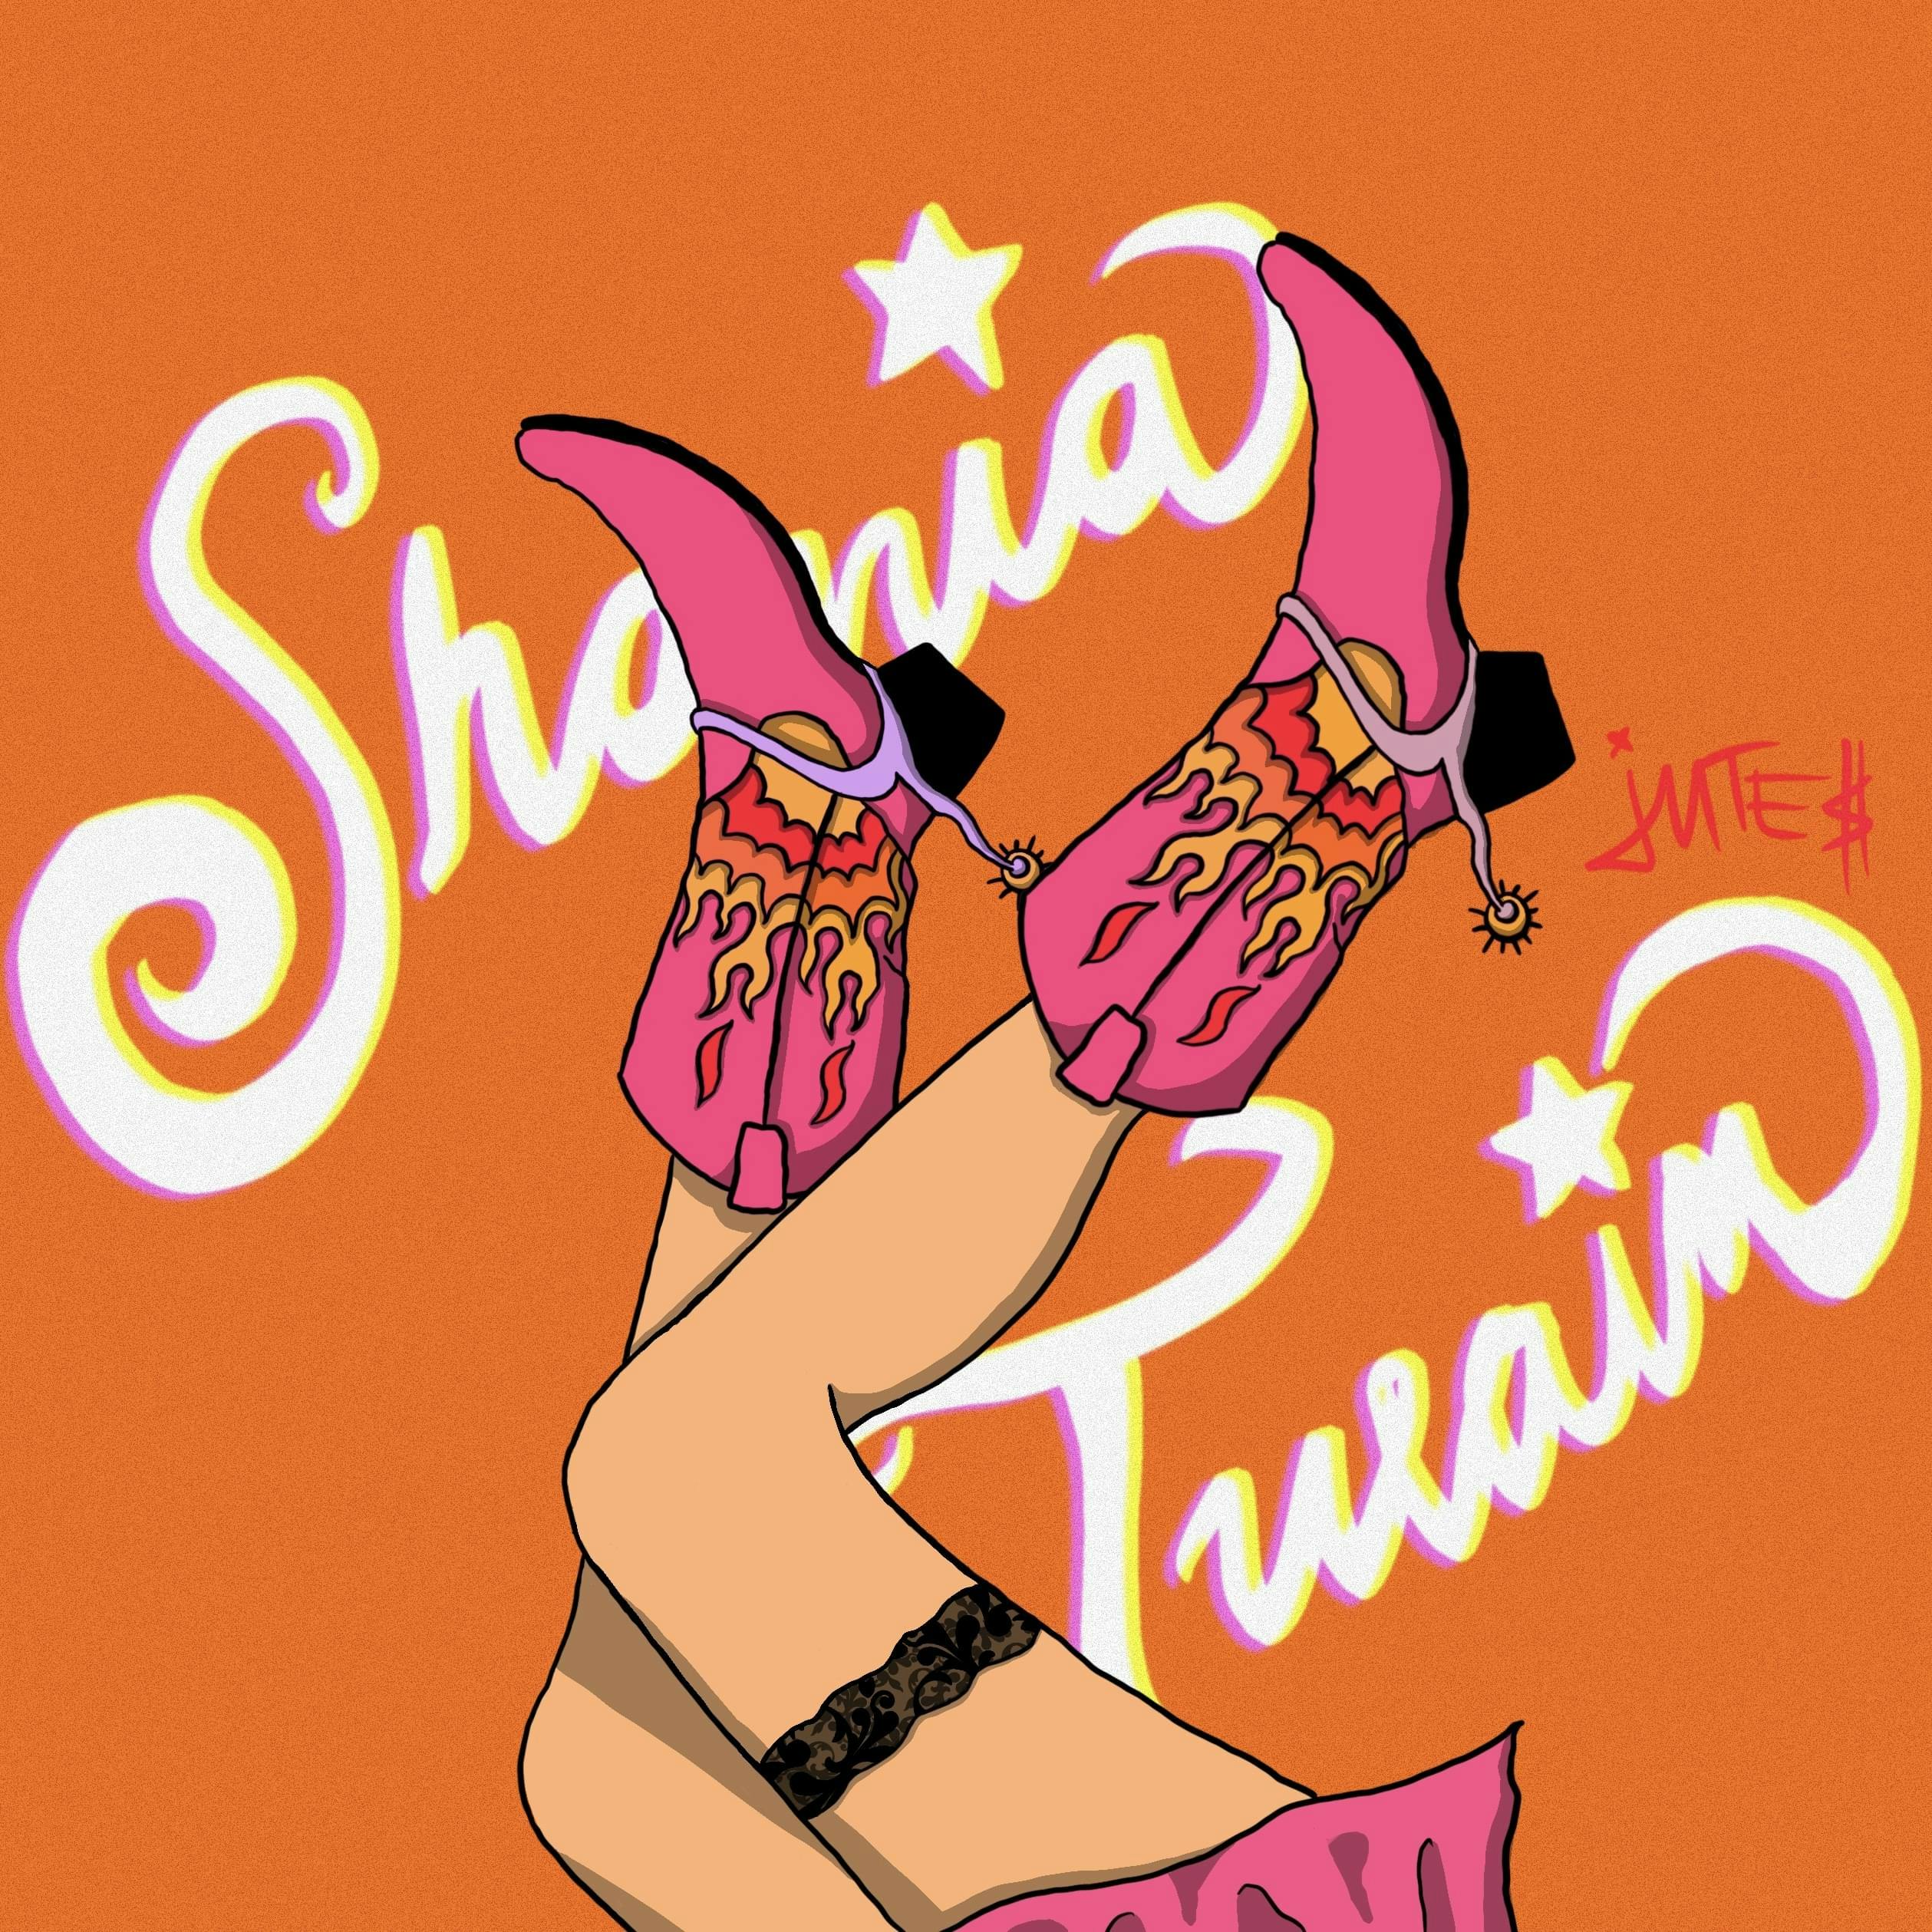 Cover art for jutes's song: shania twain